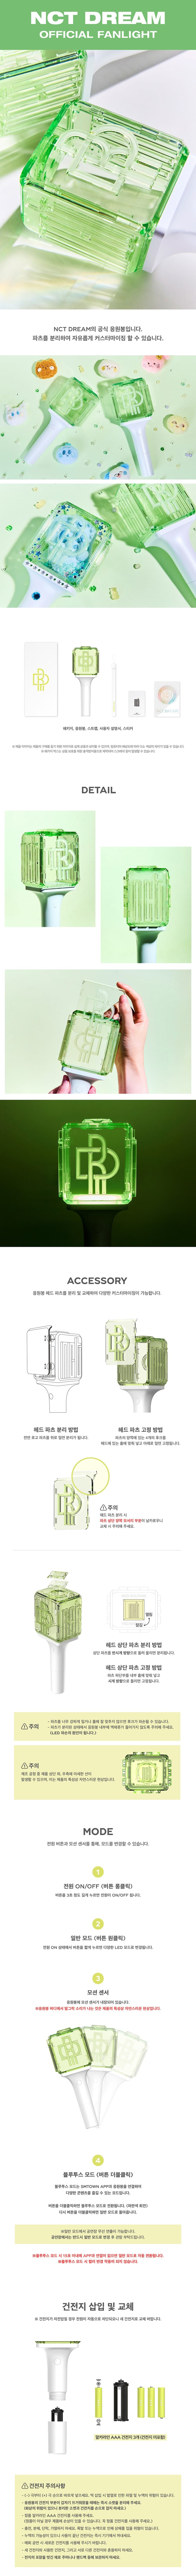 nct-official-fanlight-ver-2-nct-dream-ver-wholesales